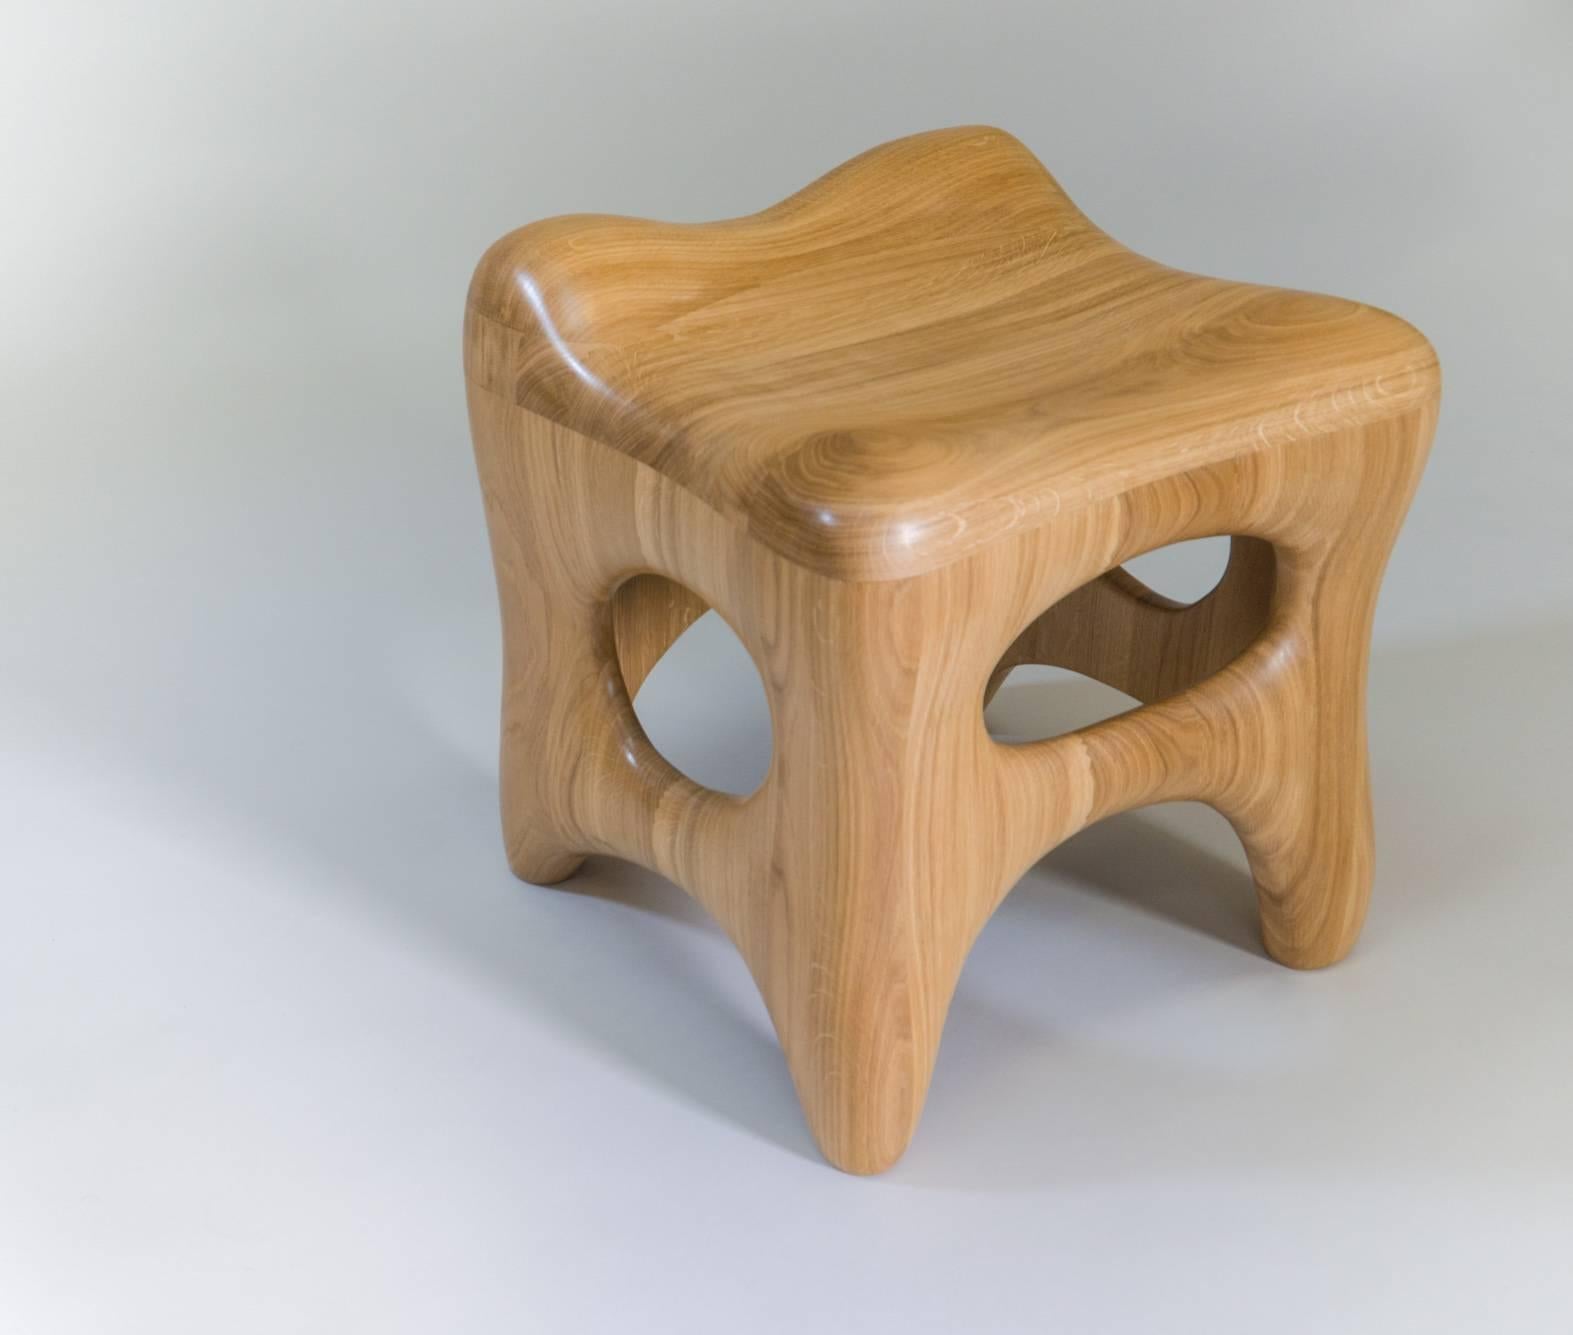 Both sculpture and stool this piece by Jacques Jarrige is evocative and comfortable. Sculpted by hand in solid oak in the artist's Parisian studio the stool explores solid and voids and its interaction with the surrounding space.